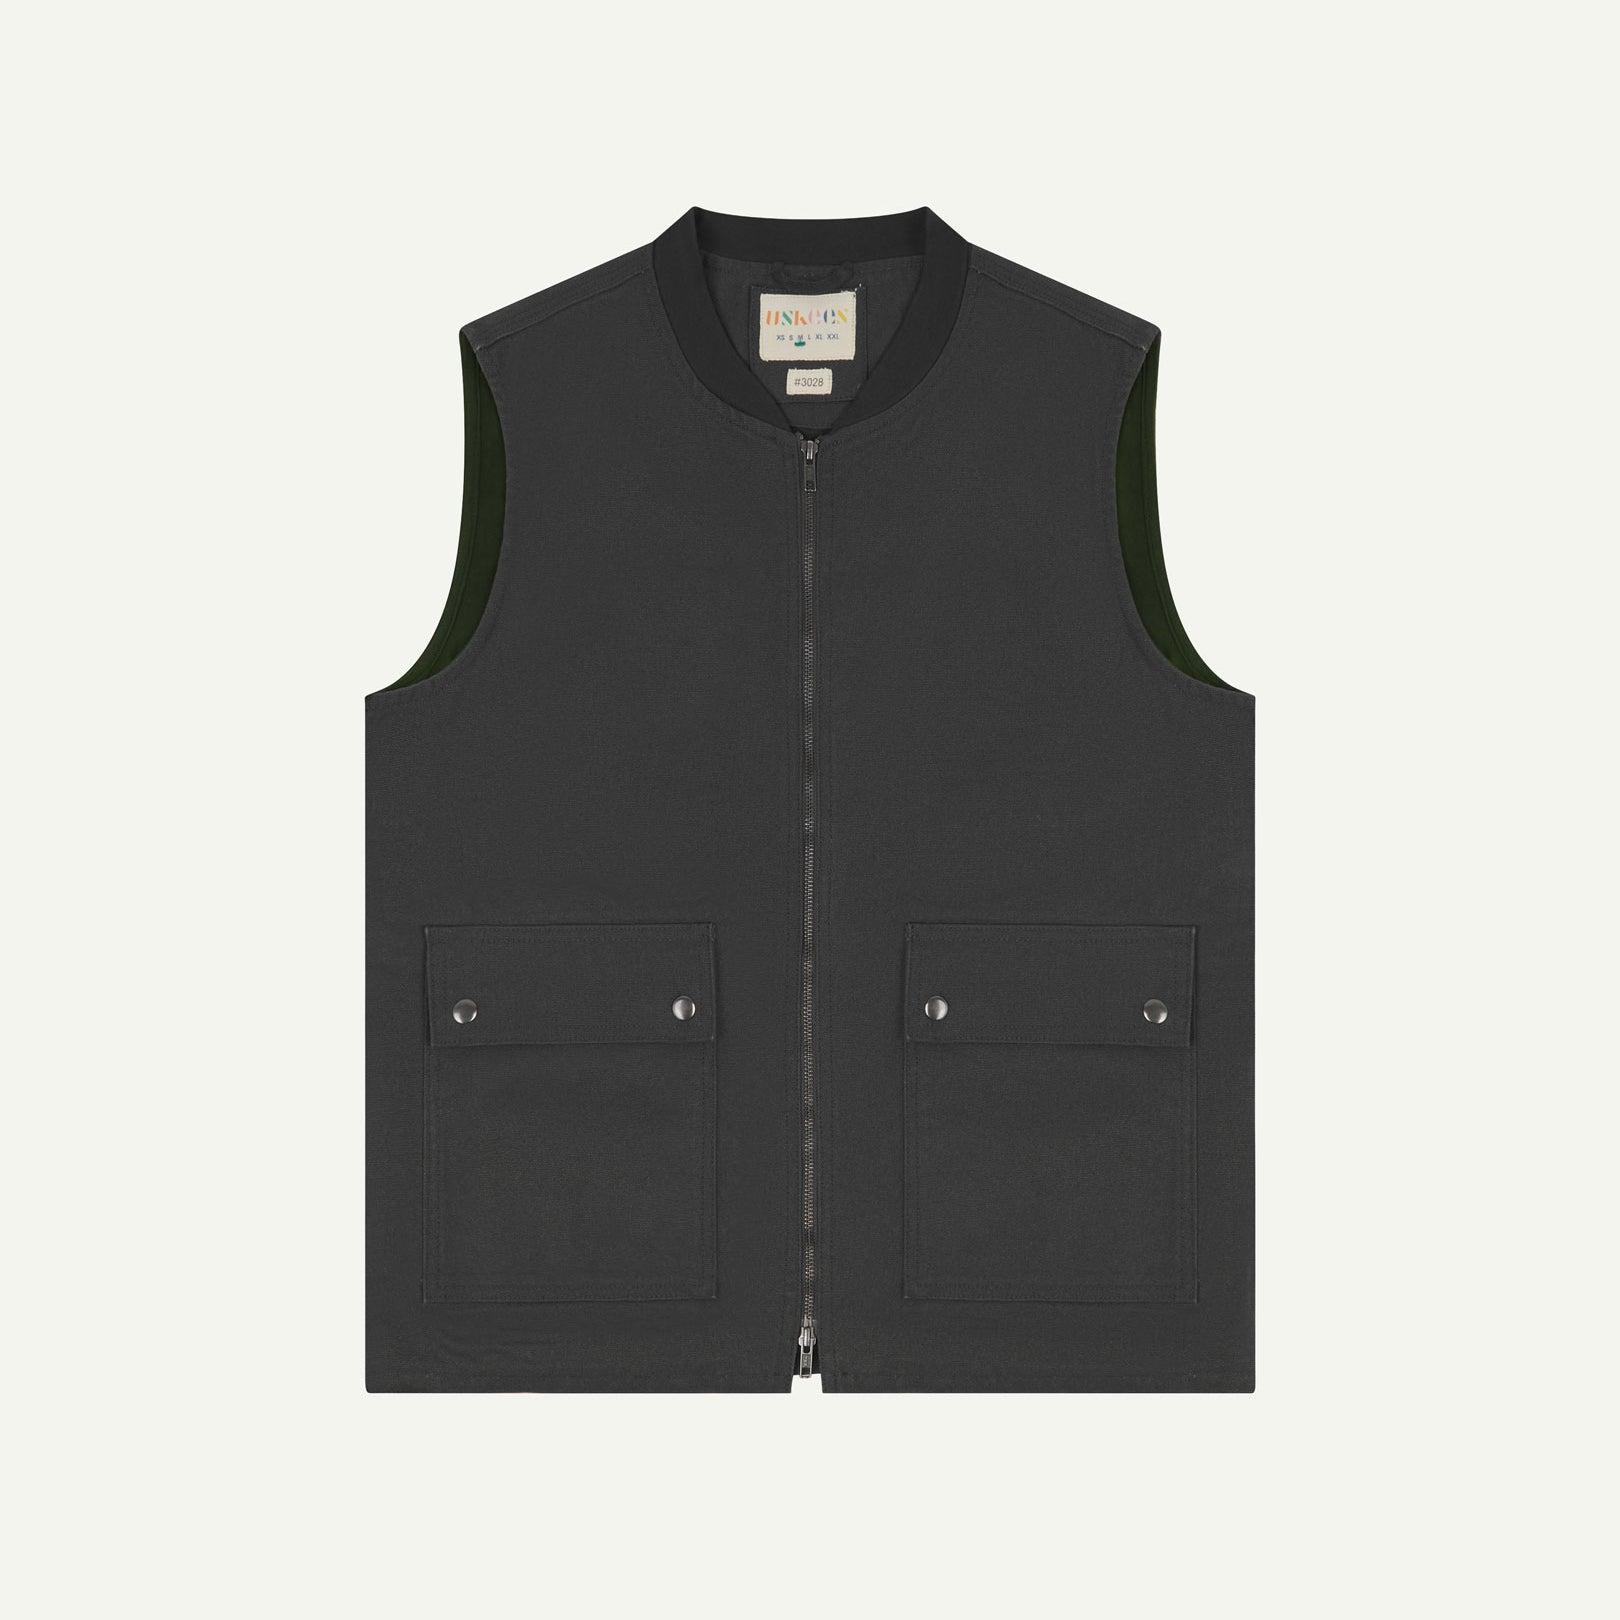 Front flat shot of Uskees charcoal-grey gilet-type zip front waistcoat showing the front flap pockets and inner brand label at neck.